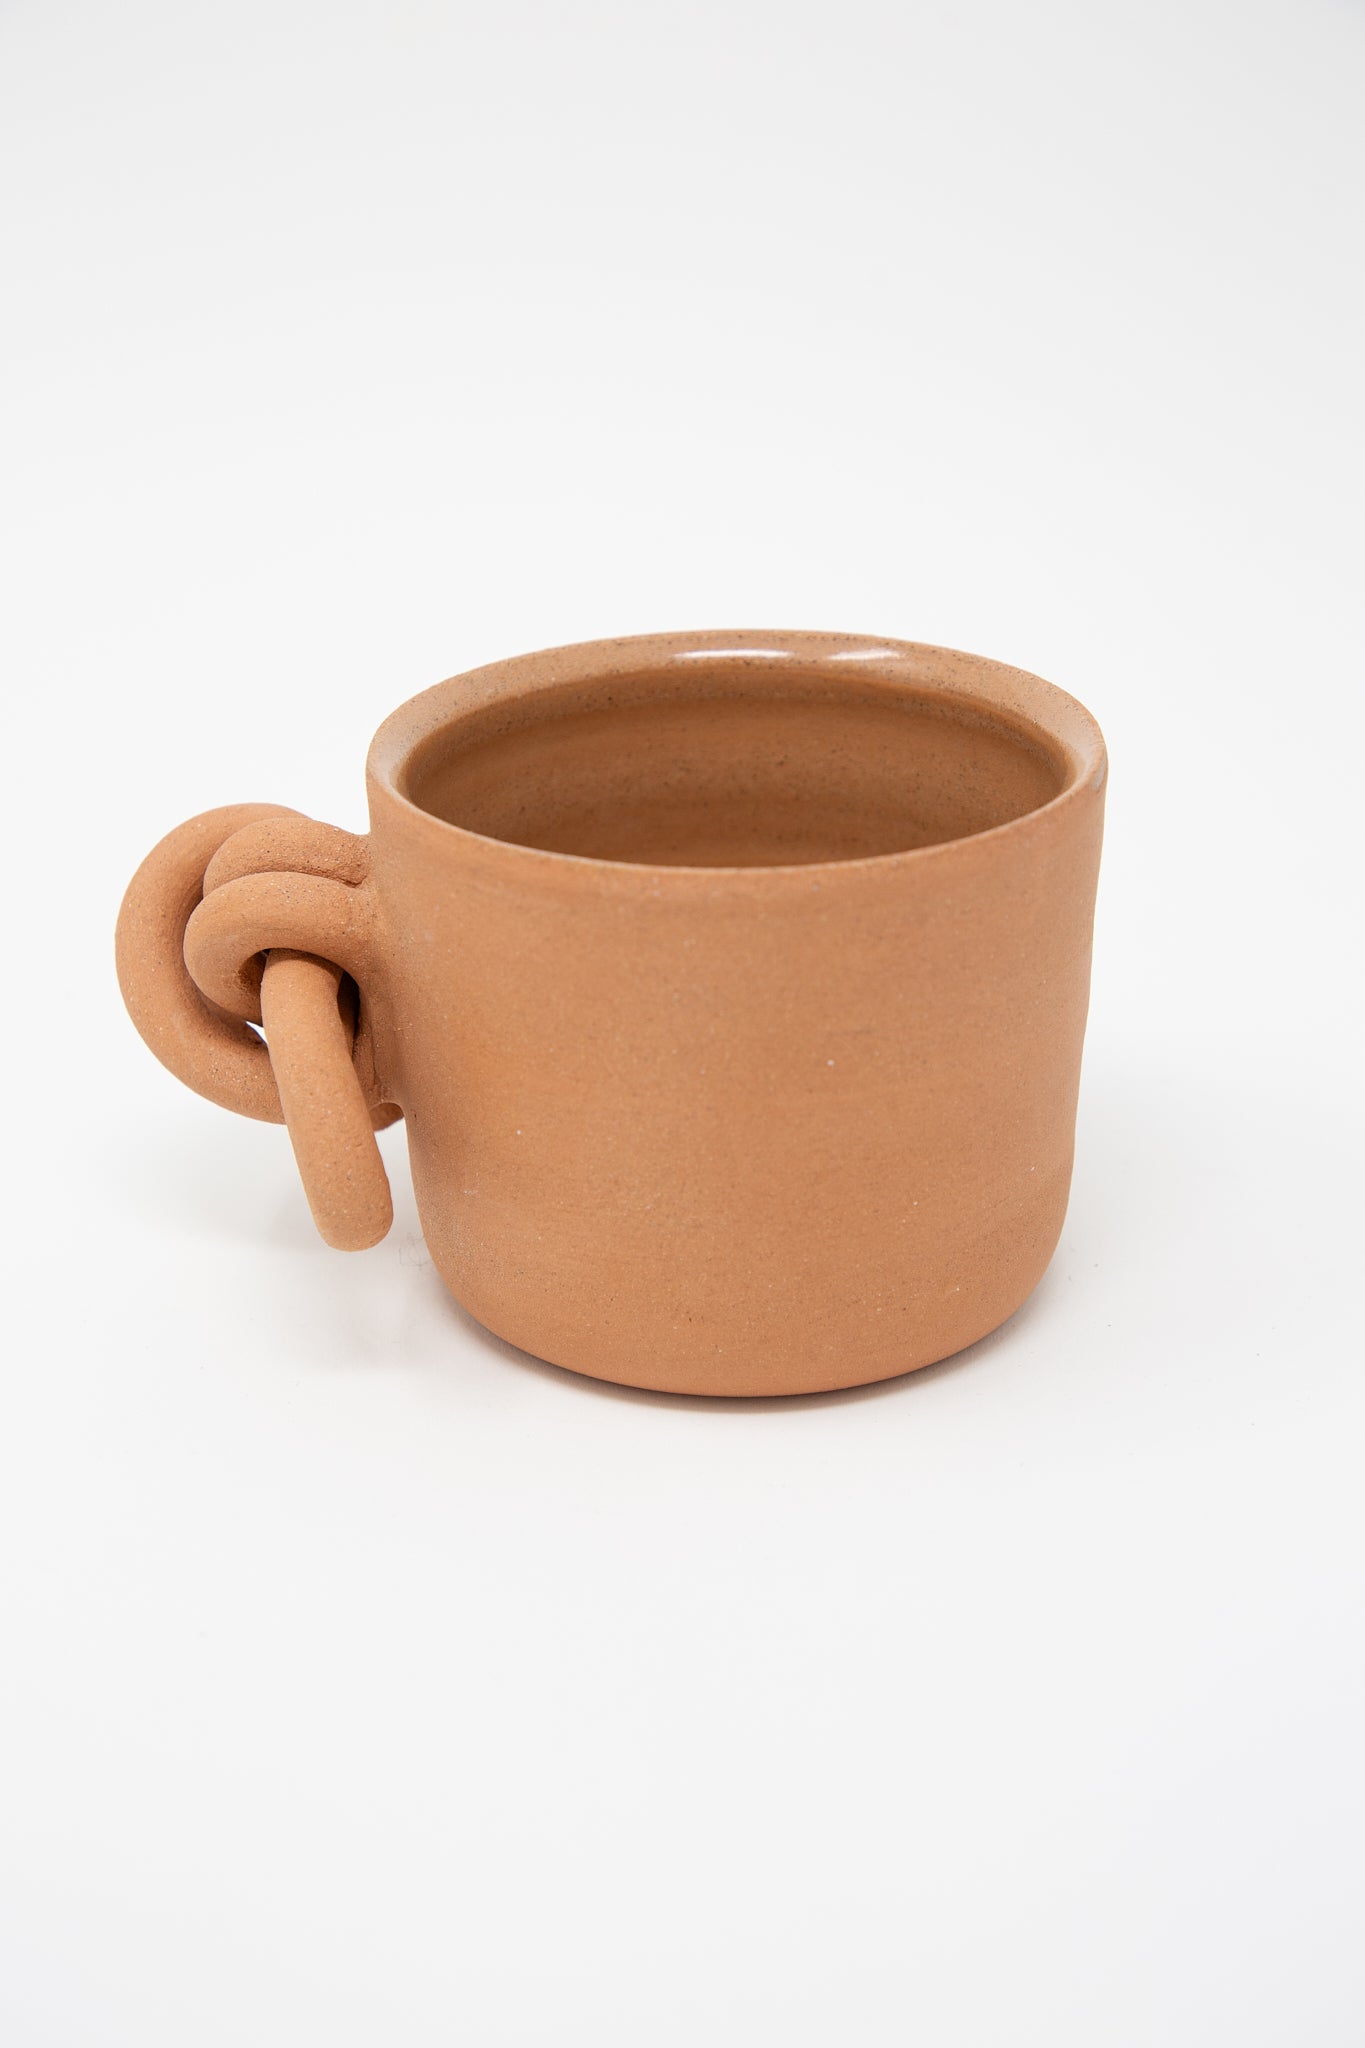 A Lost Quarry Mug in Single Knot with Ends.